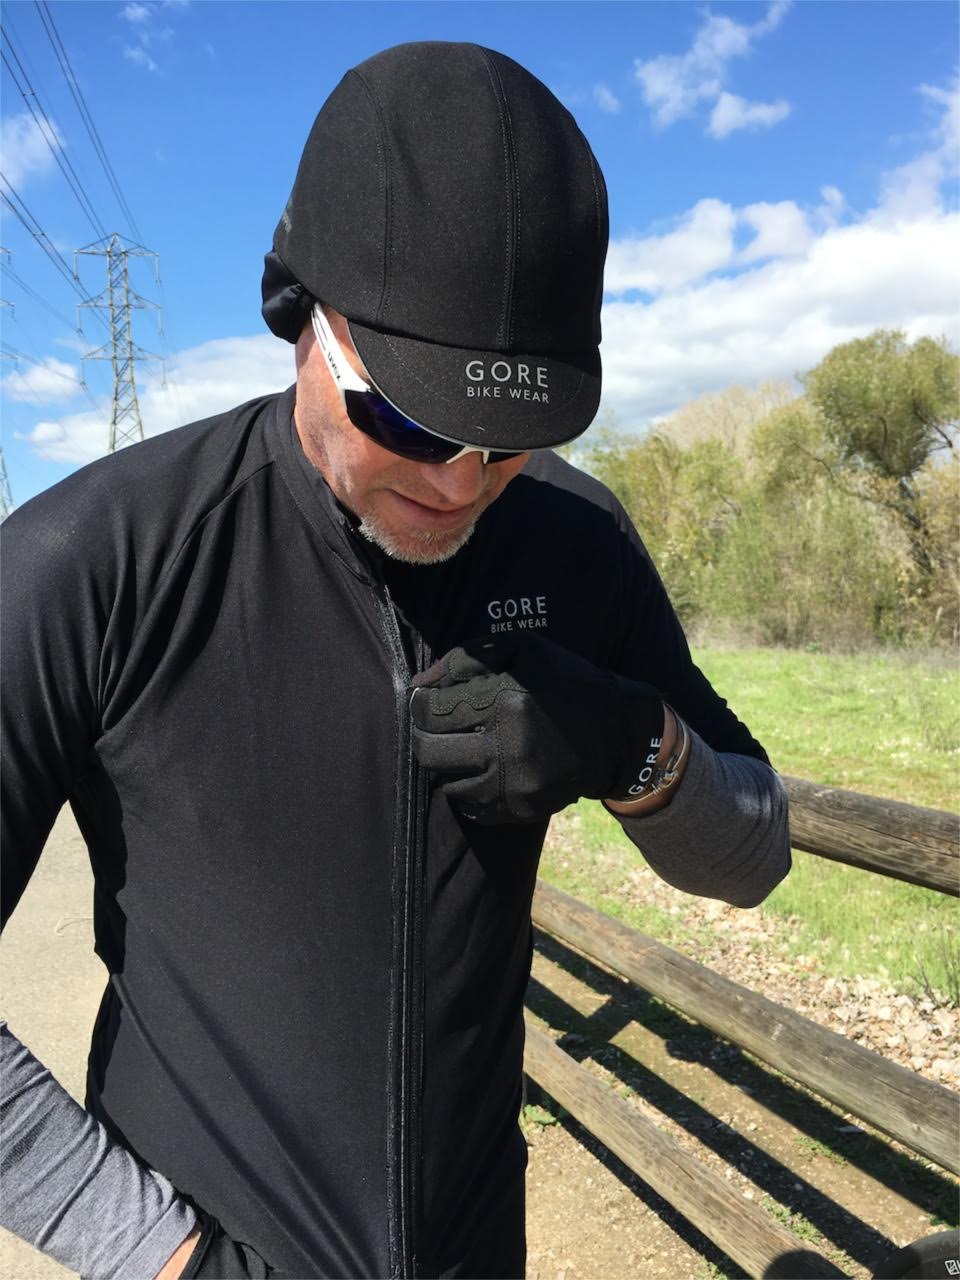 GORE Windstopper Kit: Quick Review - Riding Gravel